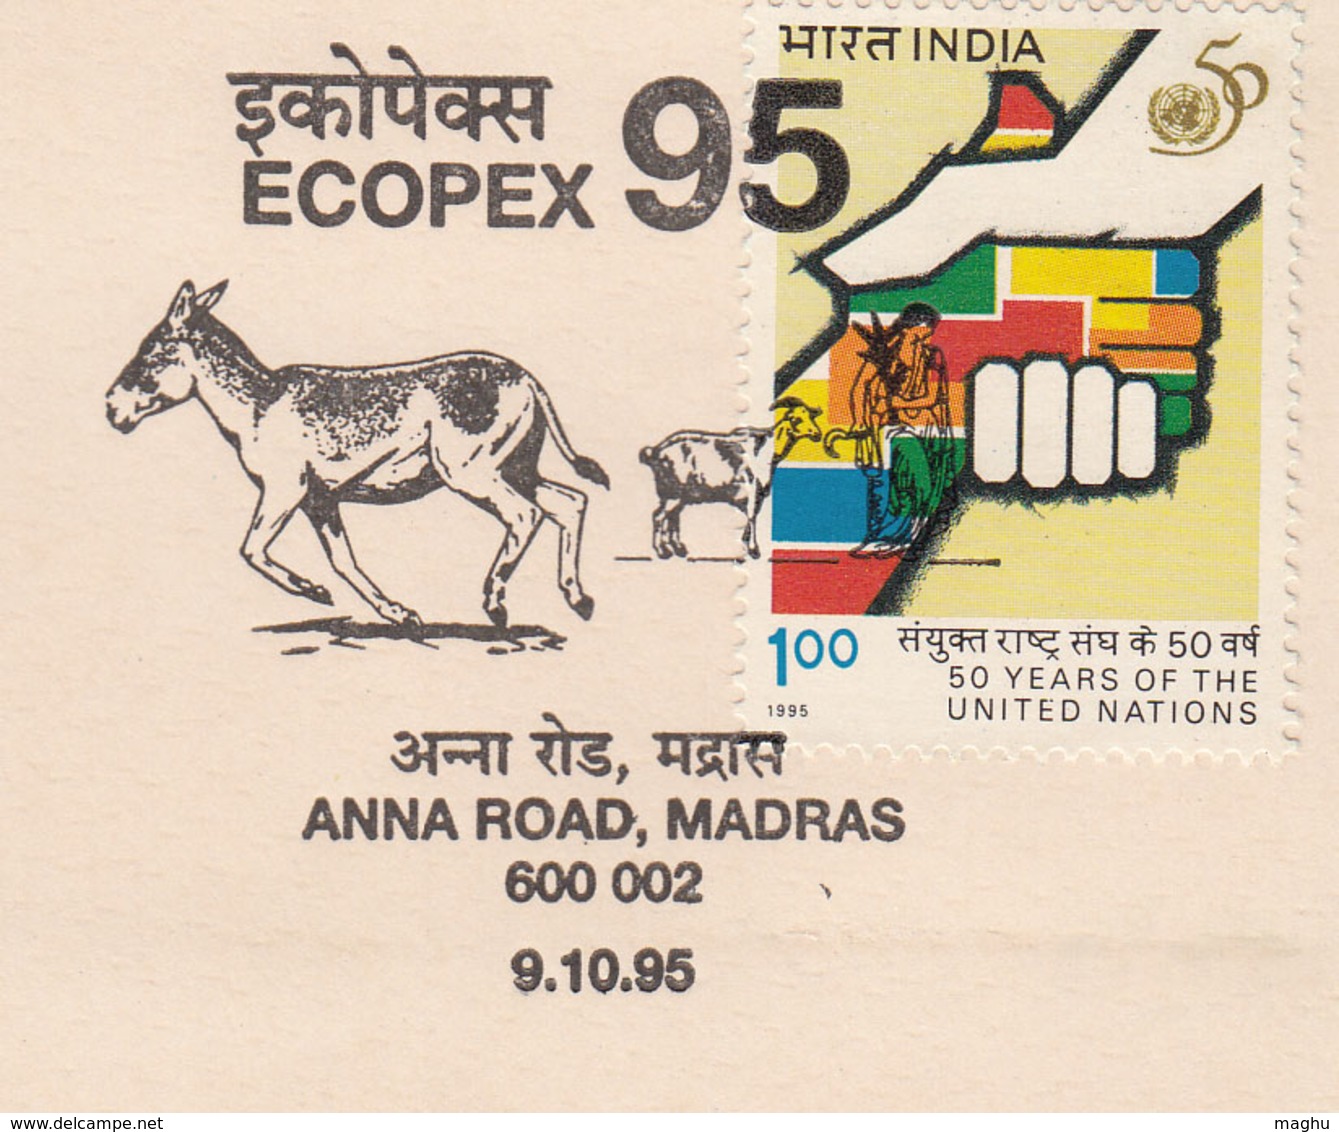 Ass, Donkey, Goat, Cow, Animail, Tree Environment Protection, Pollution Impct, , ECOPEX 95, Philately Exhibition 1995 - Asini